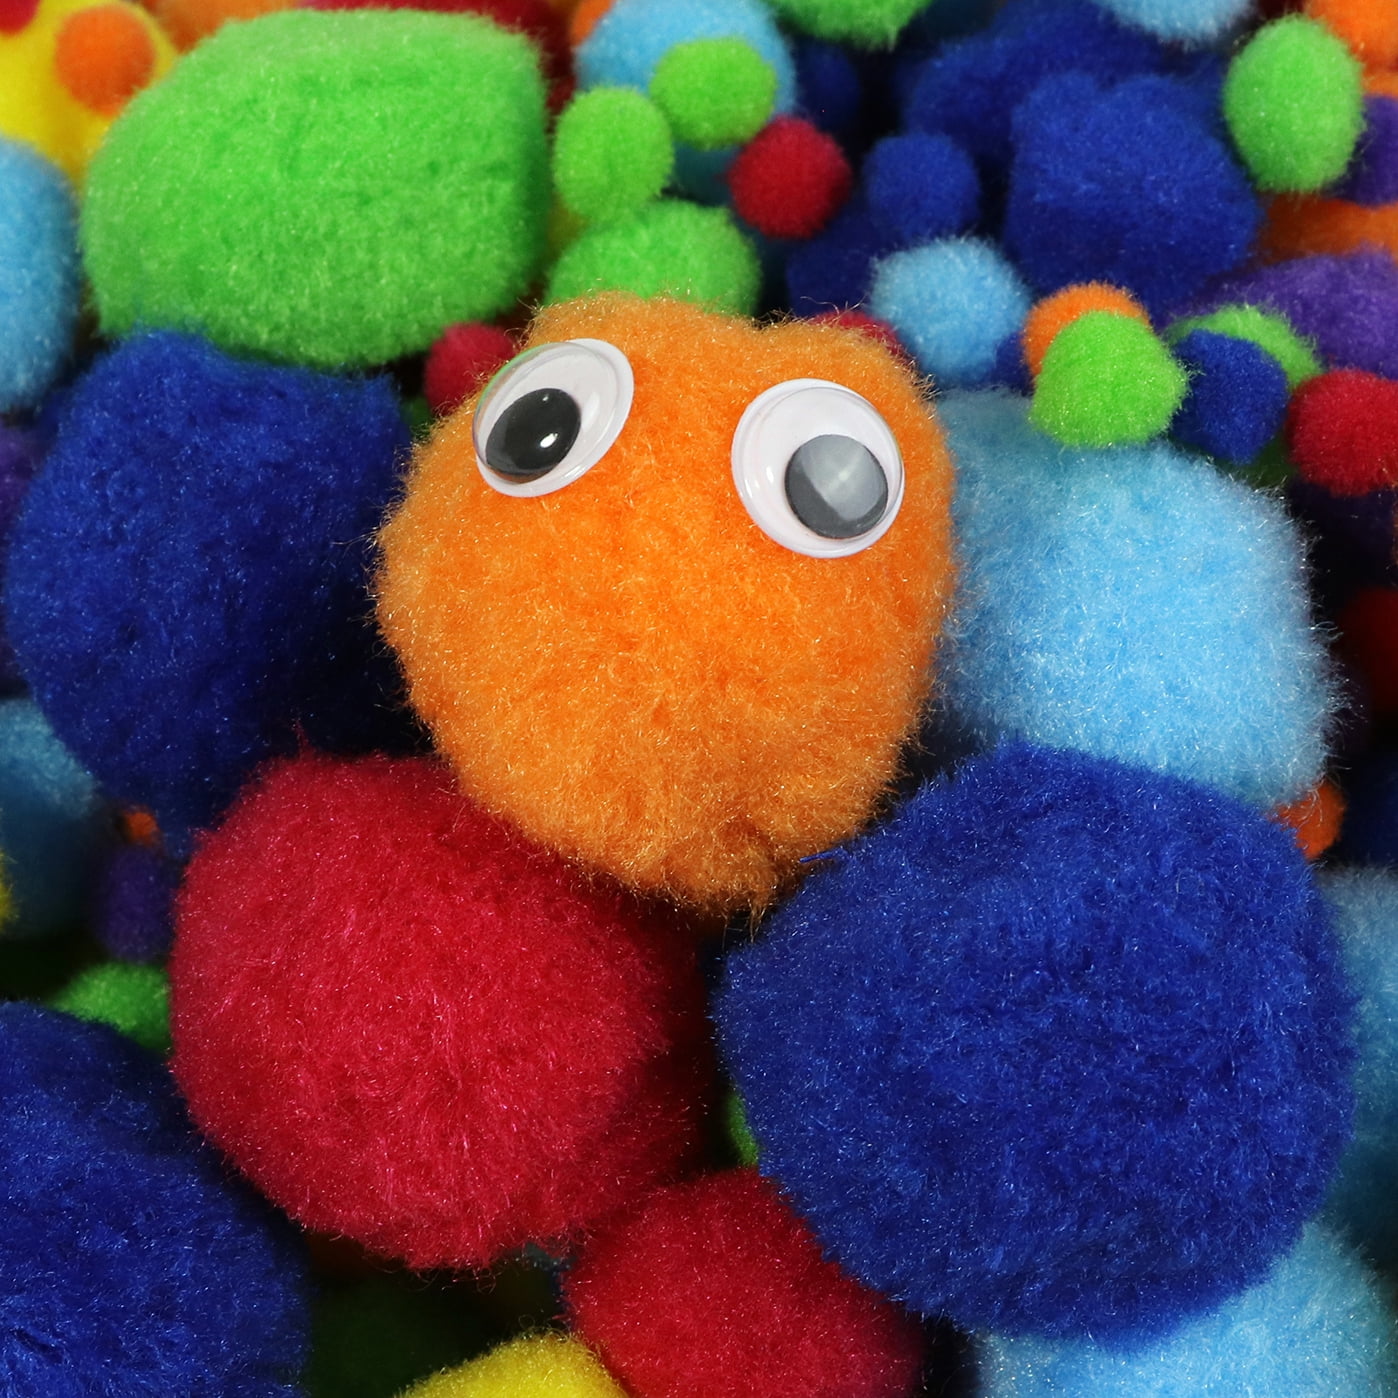 Incraftables 300 pcs Pom Poms with Googly Eyes. Best Colored Cotton 1 inch  Puff Balls Pompom for DIY Crafts, Hats, Arts and Decorations. Multicolor